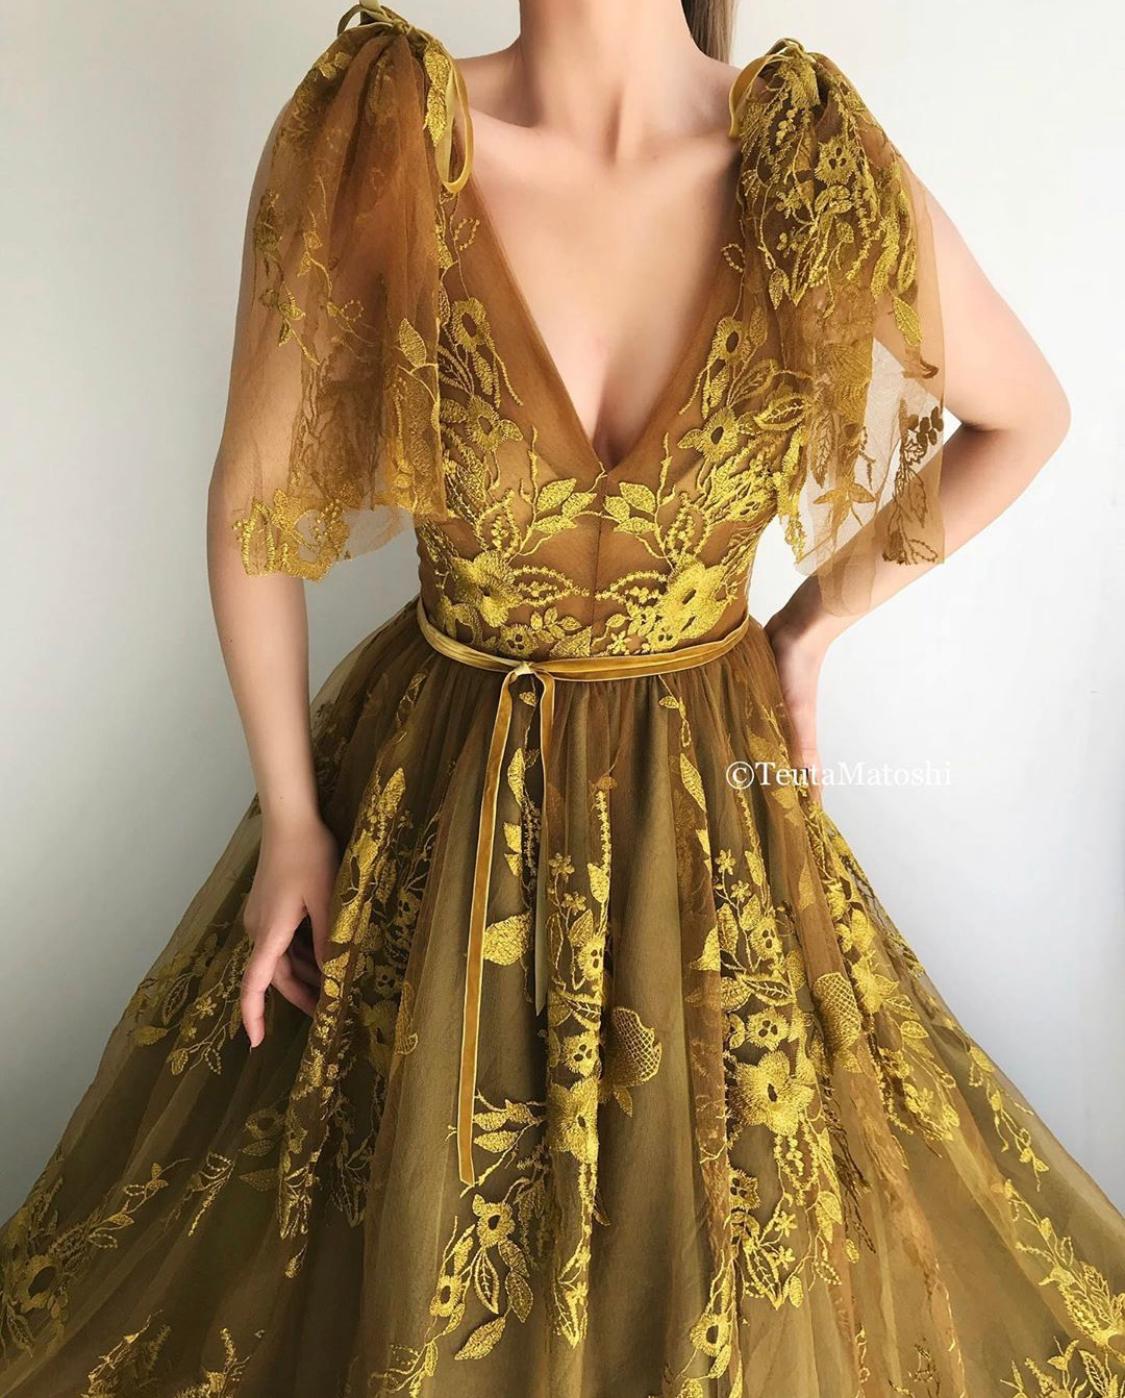 Gold A-Line dress with v-neck, no sleeves, lace and embroidery